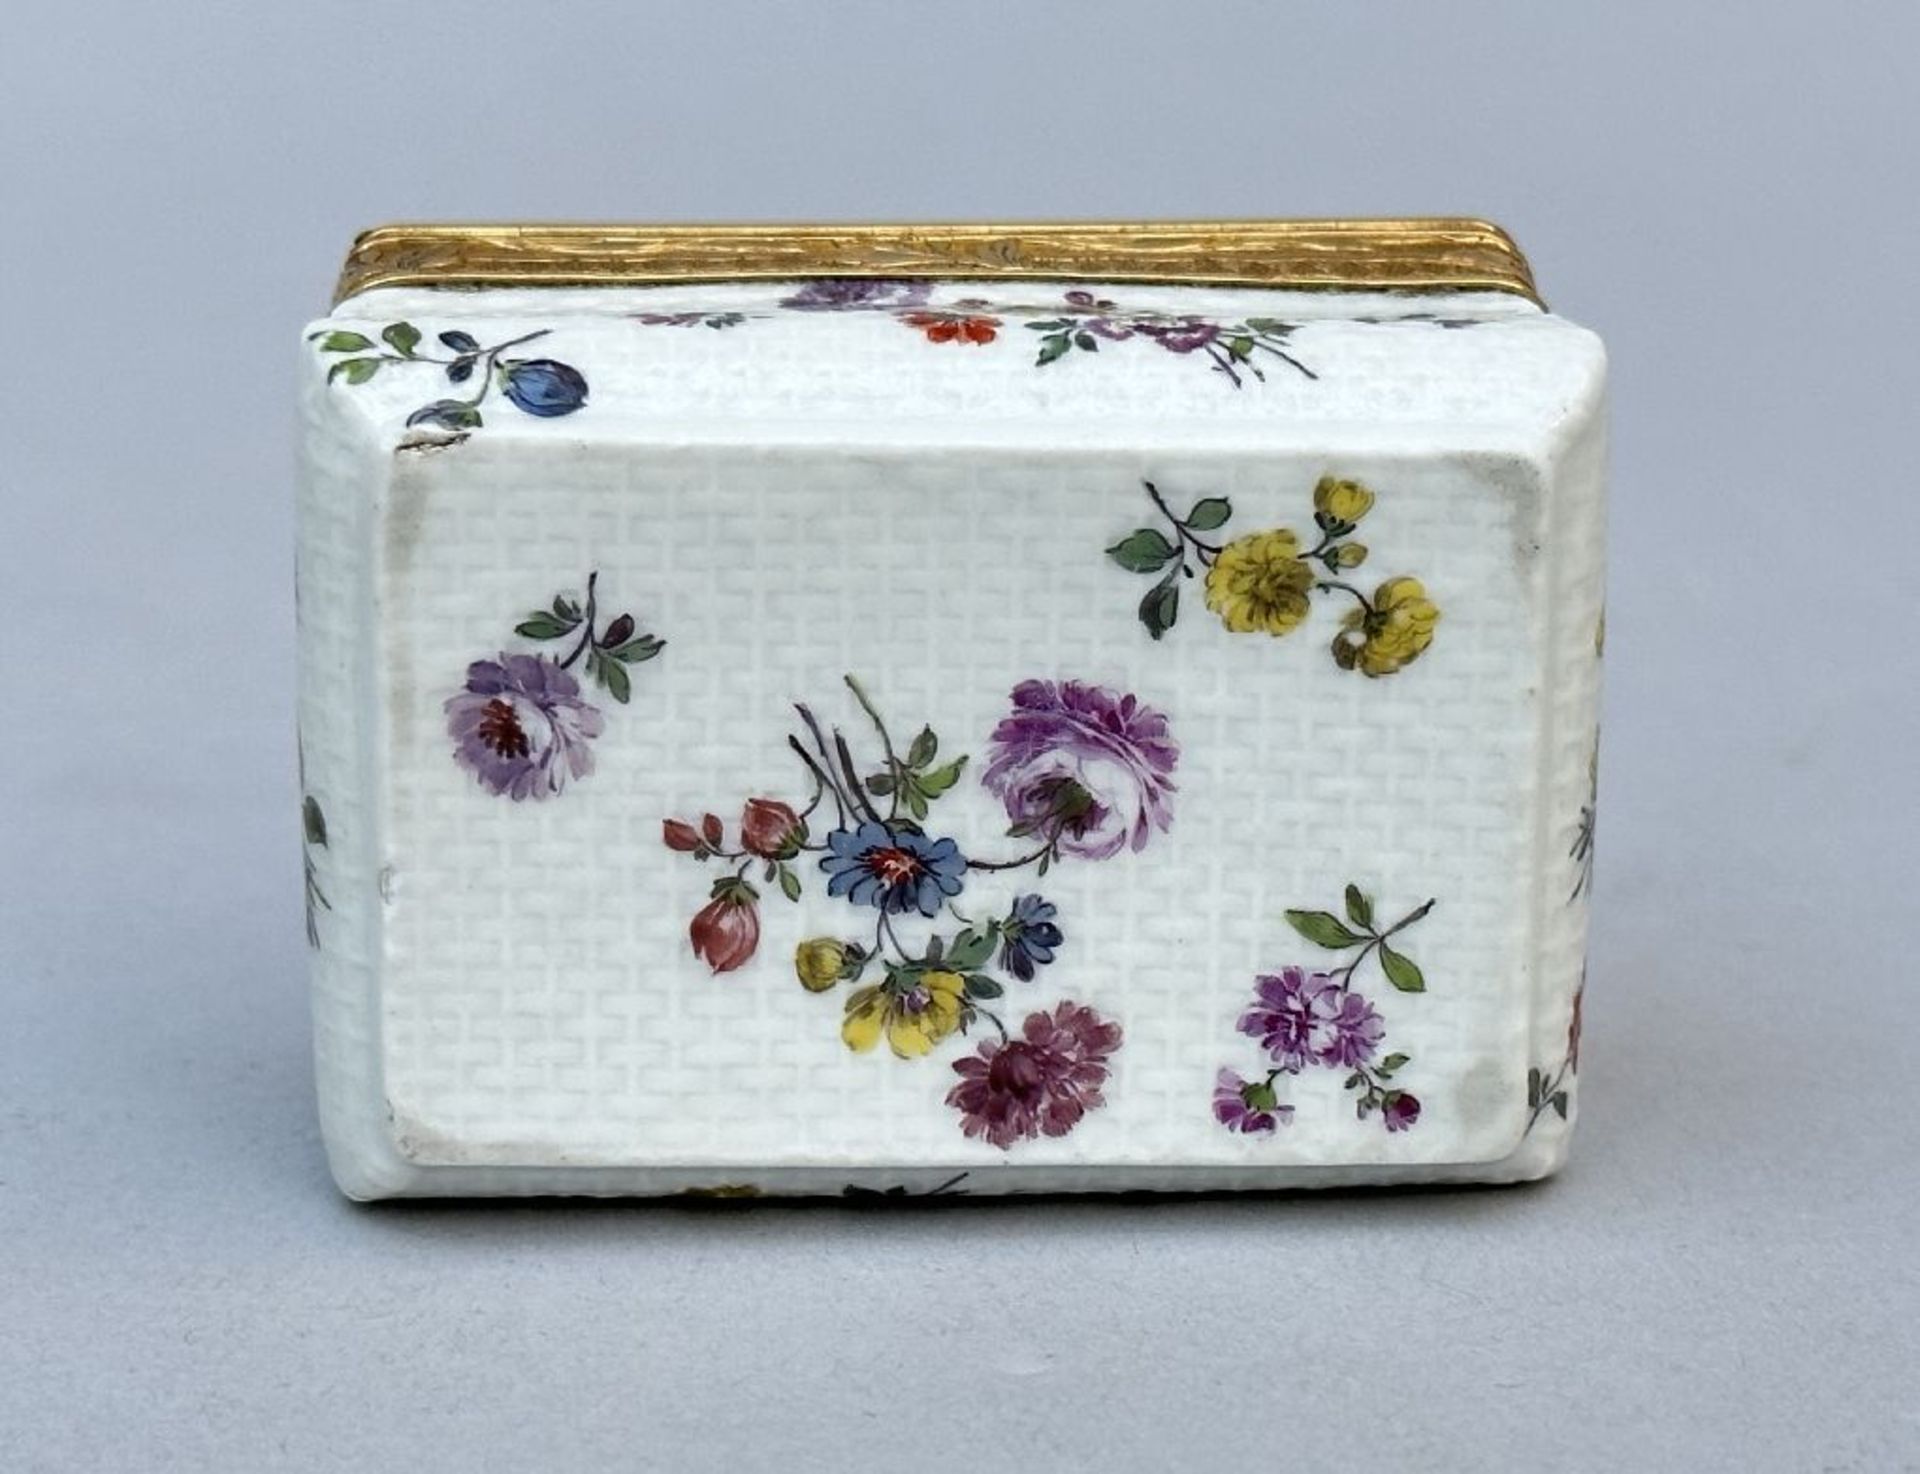 A fine snuff box in Mennecy porcelain with gold mount 'flowers', 18th century - Image 3 of 6